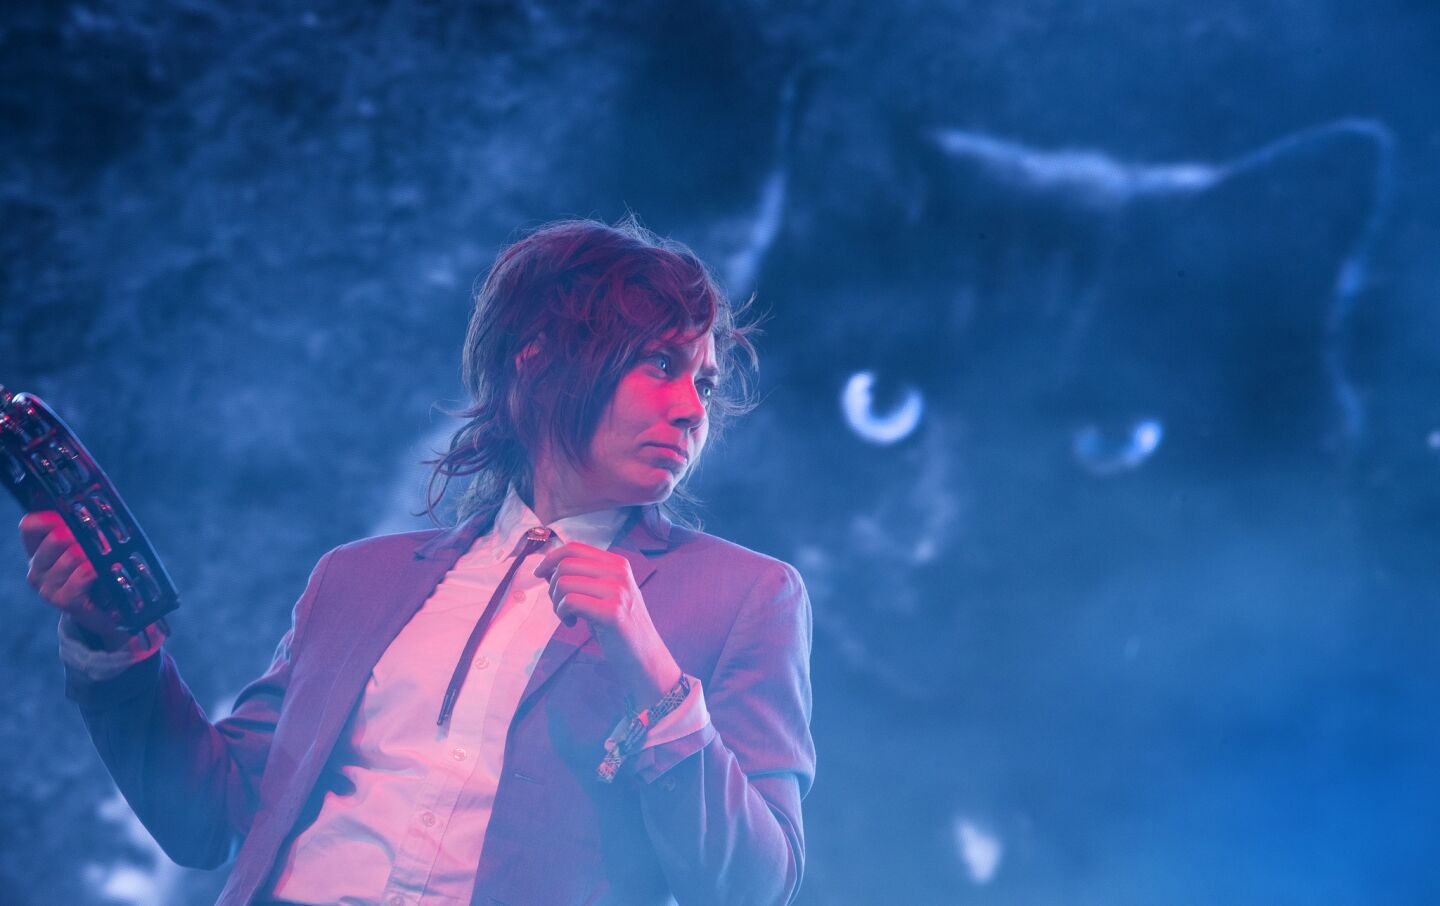 Angel Olsen's keyboardist and backing vocalist (NAME N/A) shakes a tambourine against a backdrop featuring Angel's cat on stage at the Coachella Valley Music and Arts Festival on April 14.